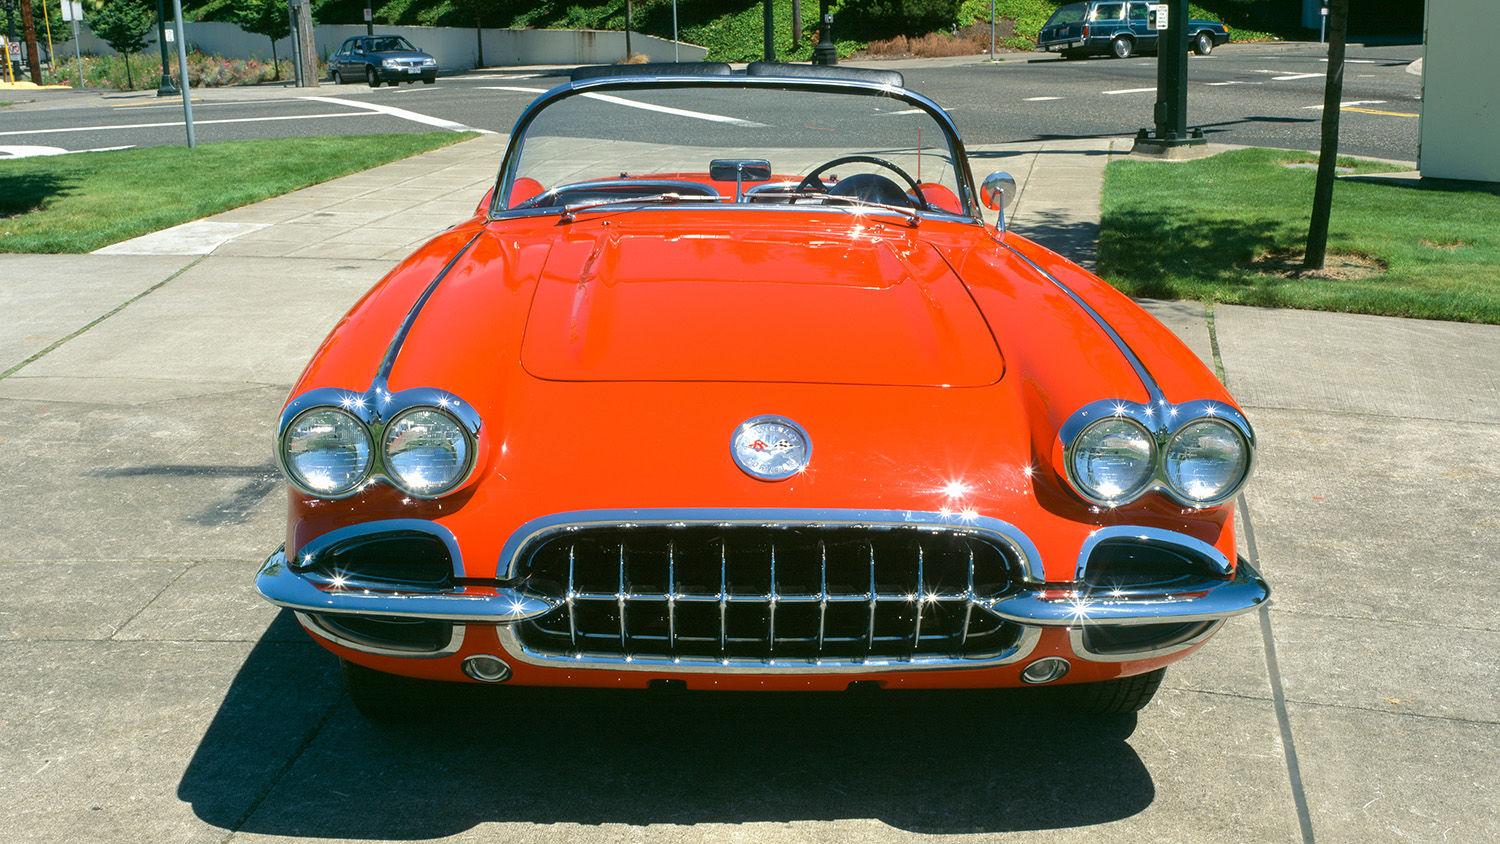 1959 Chevrolet Corvette, Red, Sitting parked in a driveway